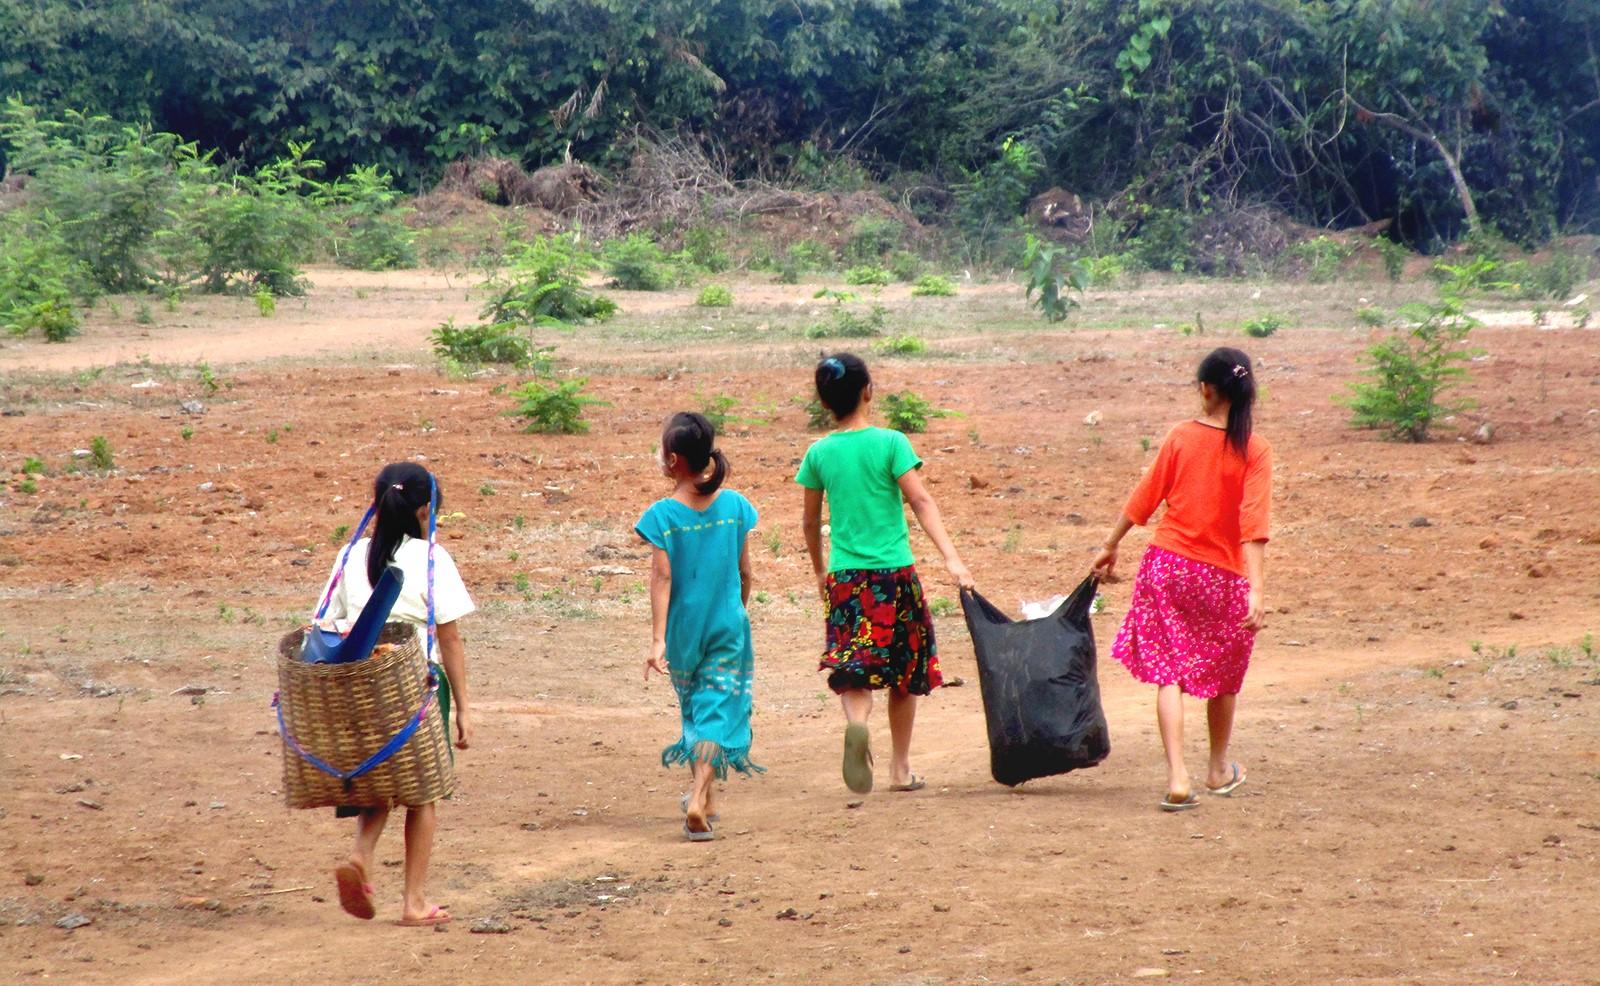 Children with colorful clothes, walking away with trash